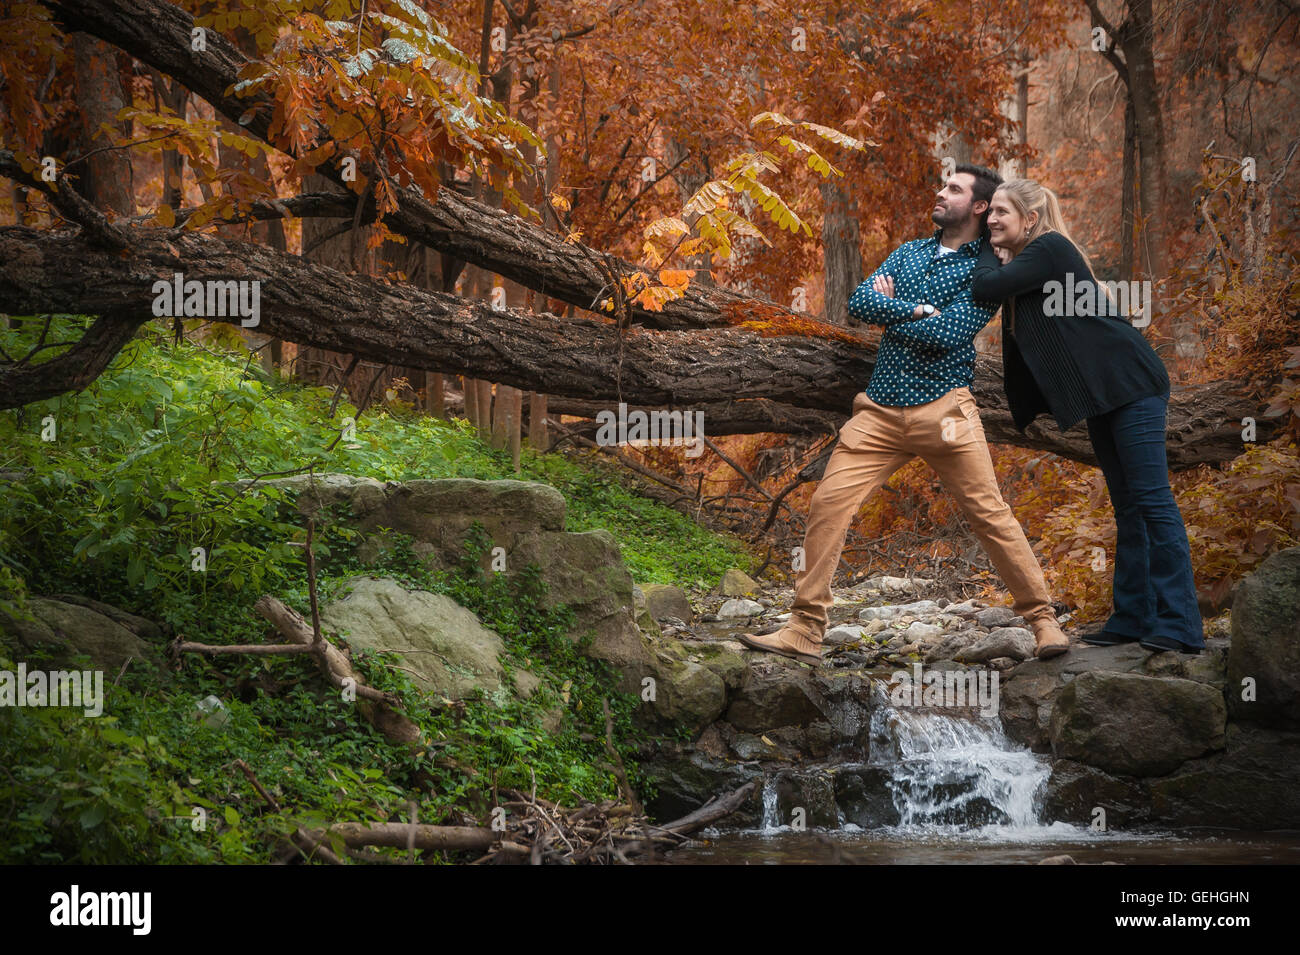 Couple cuddle next to a large tree branch and a stream in autumn Stock Photo